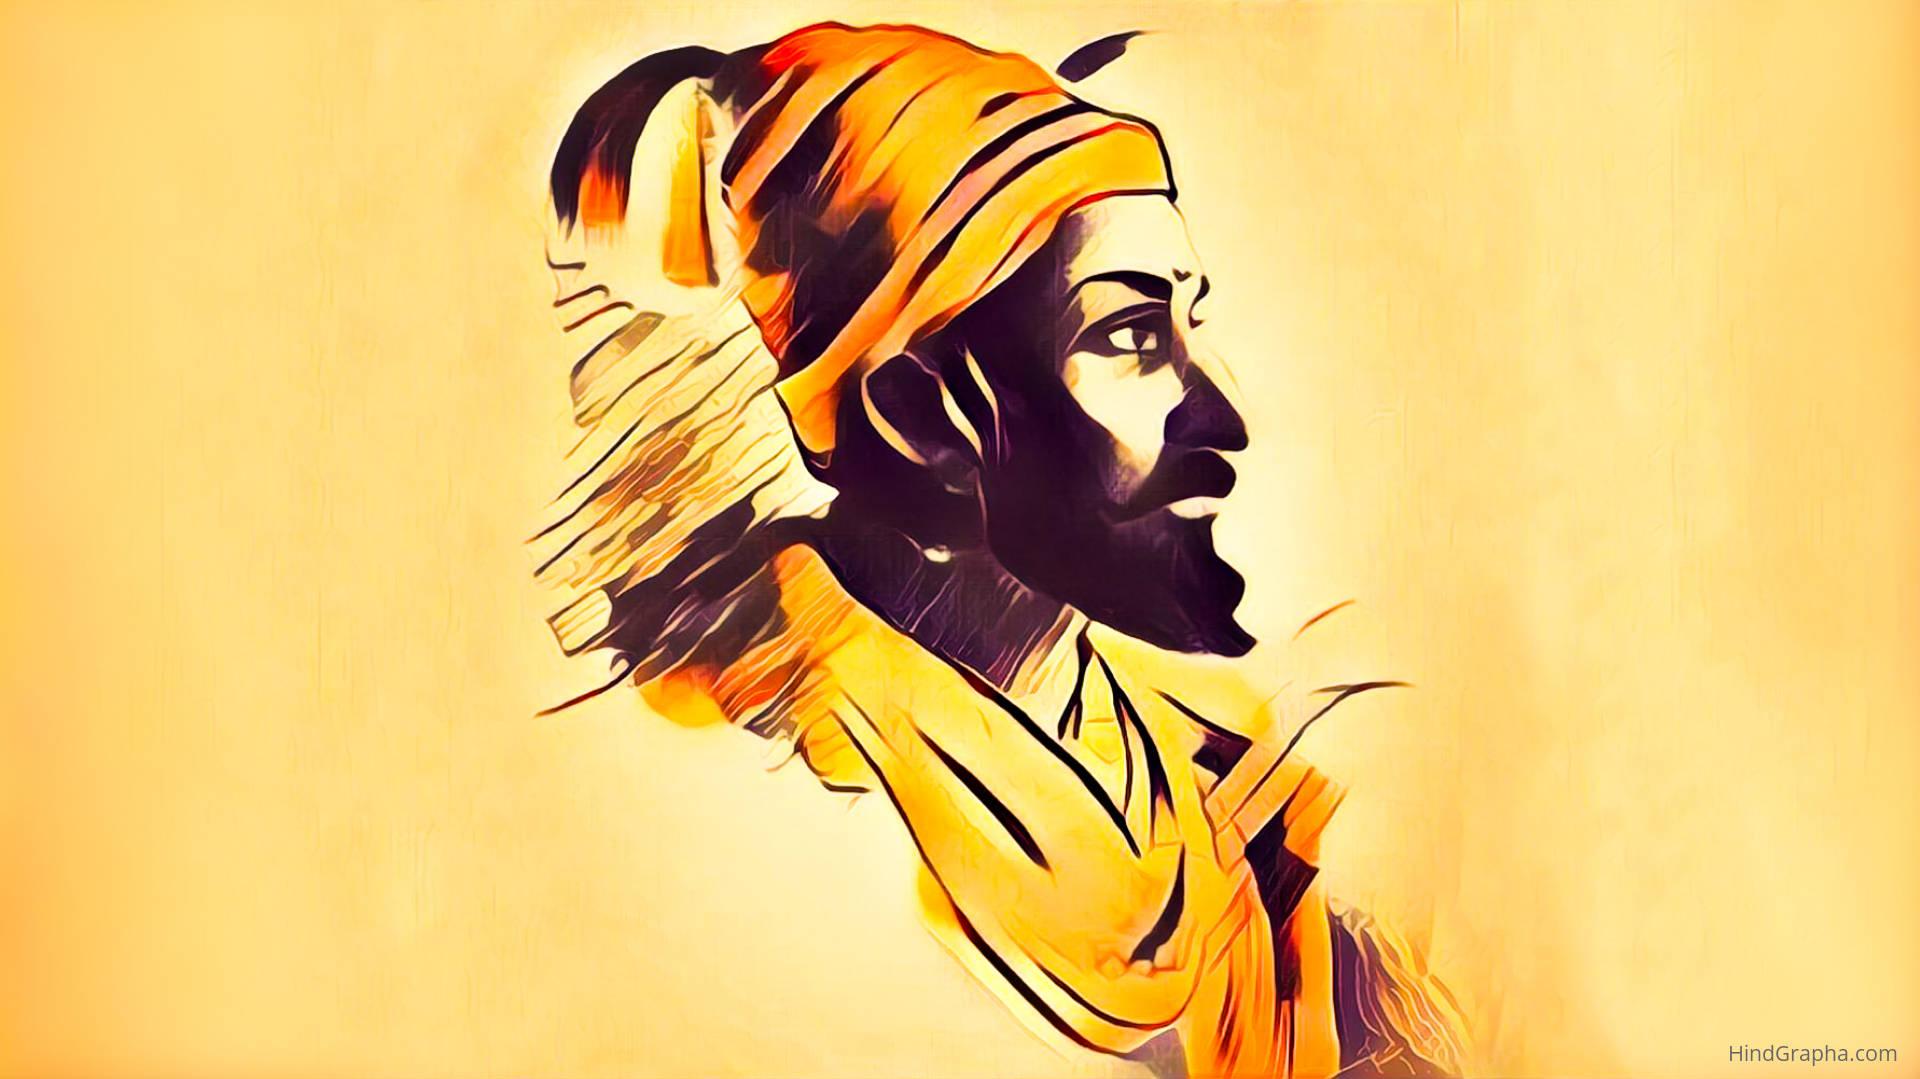 Caption Majestic Sketch Of The Great Maratha Warrior